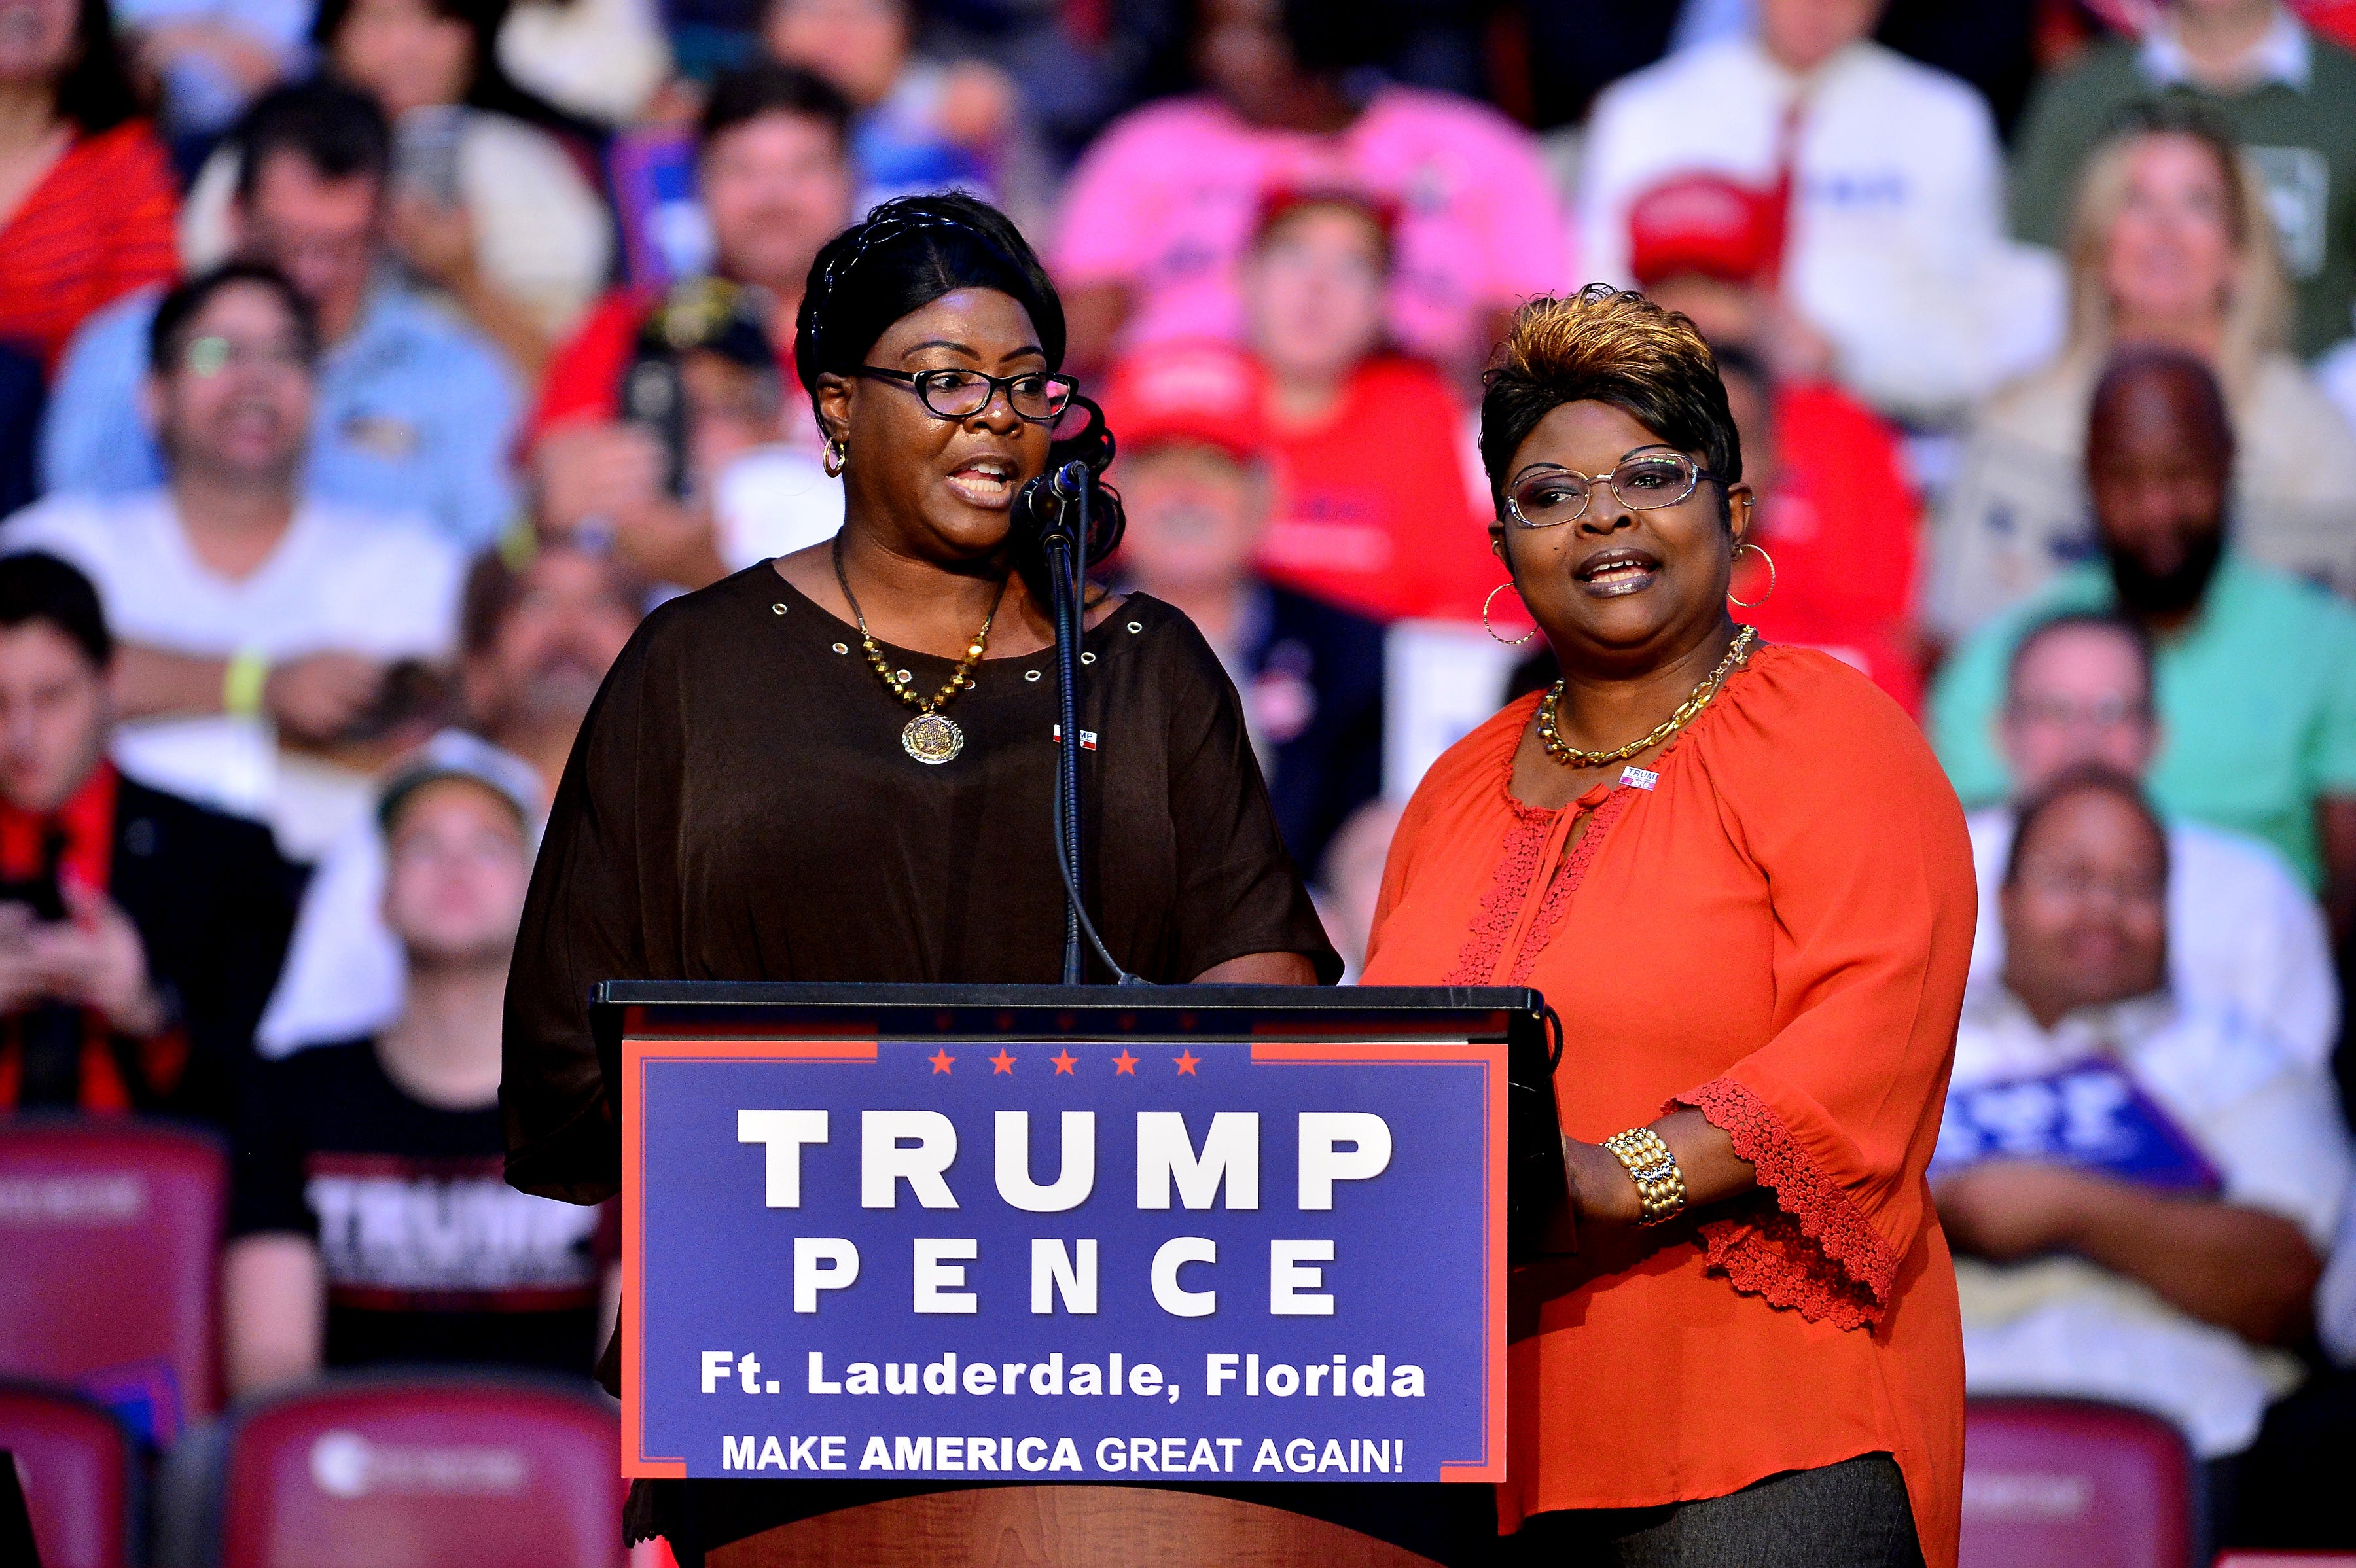 Why Are Congressional Republicans So Concerned About Controversial Trump Supporters Diamond And Silk?
